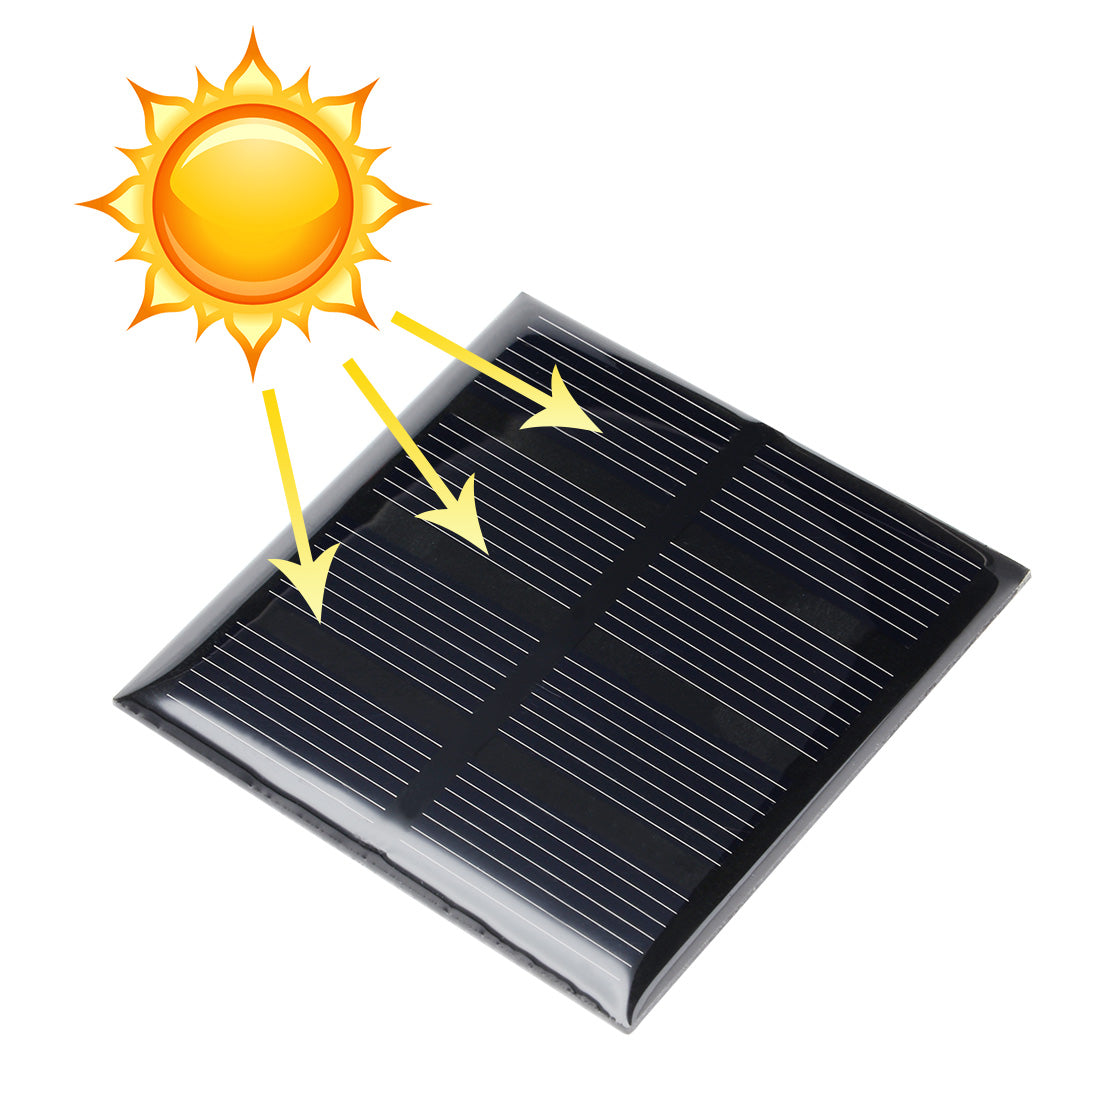 uxcell Uxcell 5Pcs 2V 160mA Poly Mini Solar Cell Panel Module DIY for Phone Light Toys Charger 60mm x 60mm